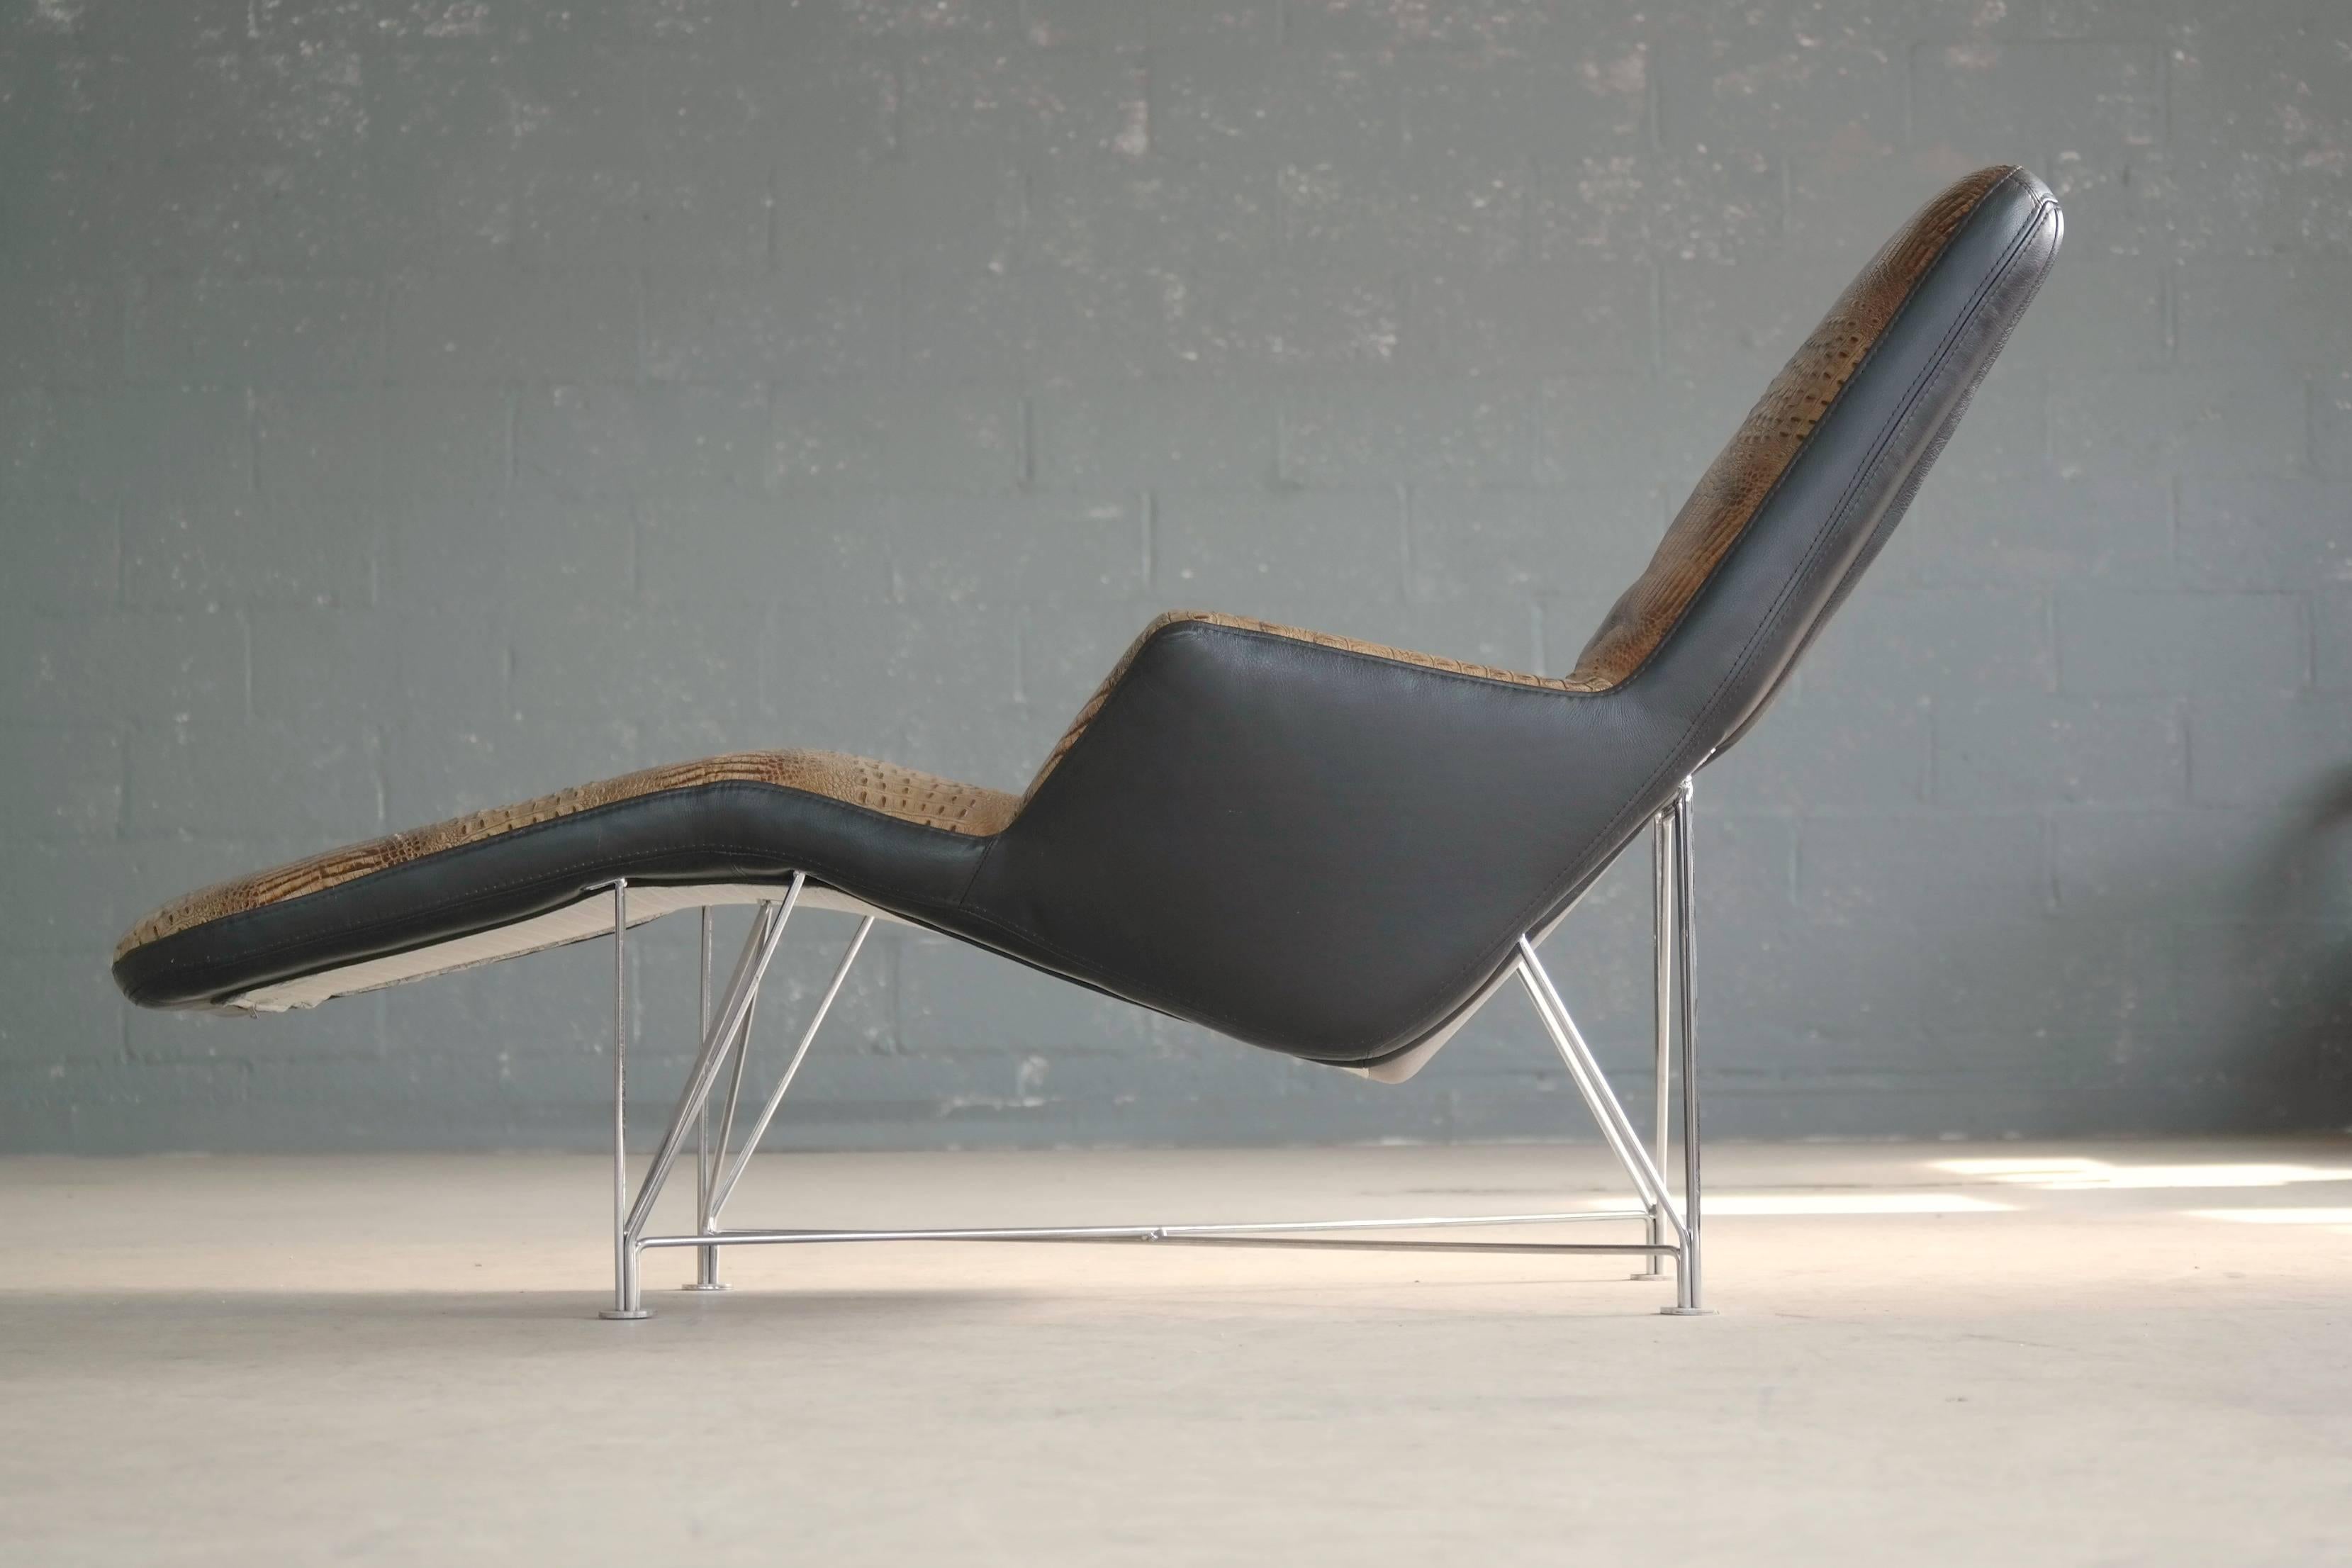 Swedish Kenneth Bergenblad Superspider Chaise Longue in Crocodile Leather for Dux Sweden